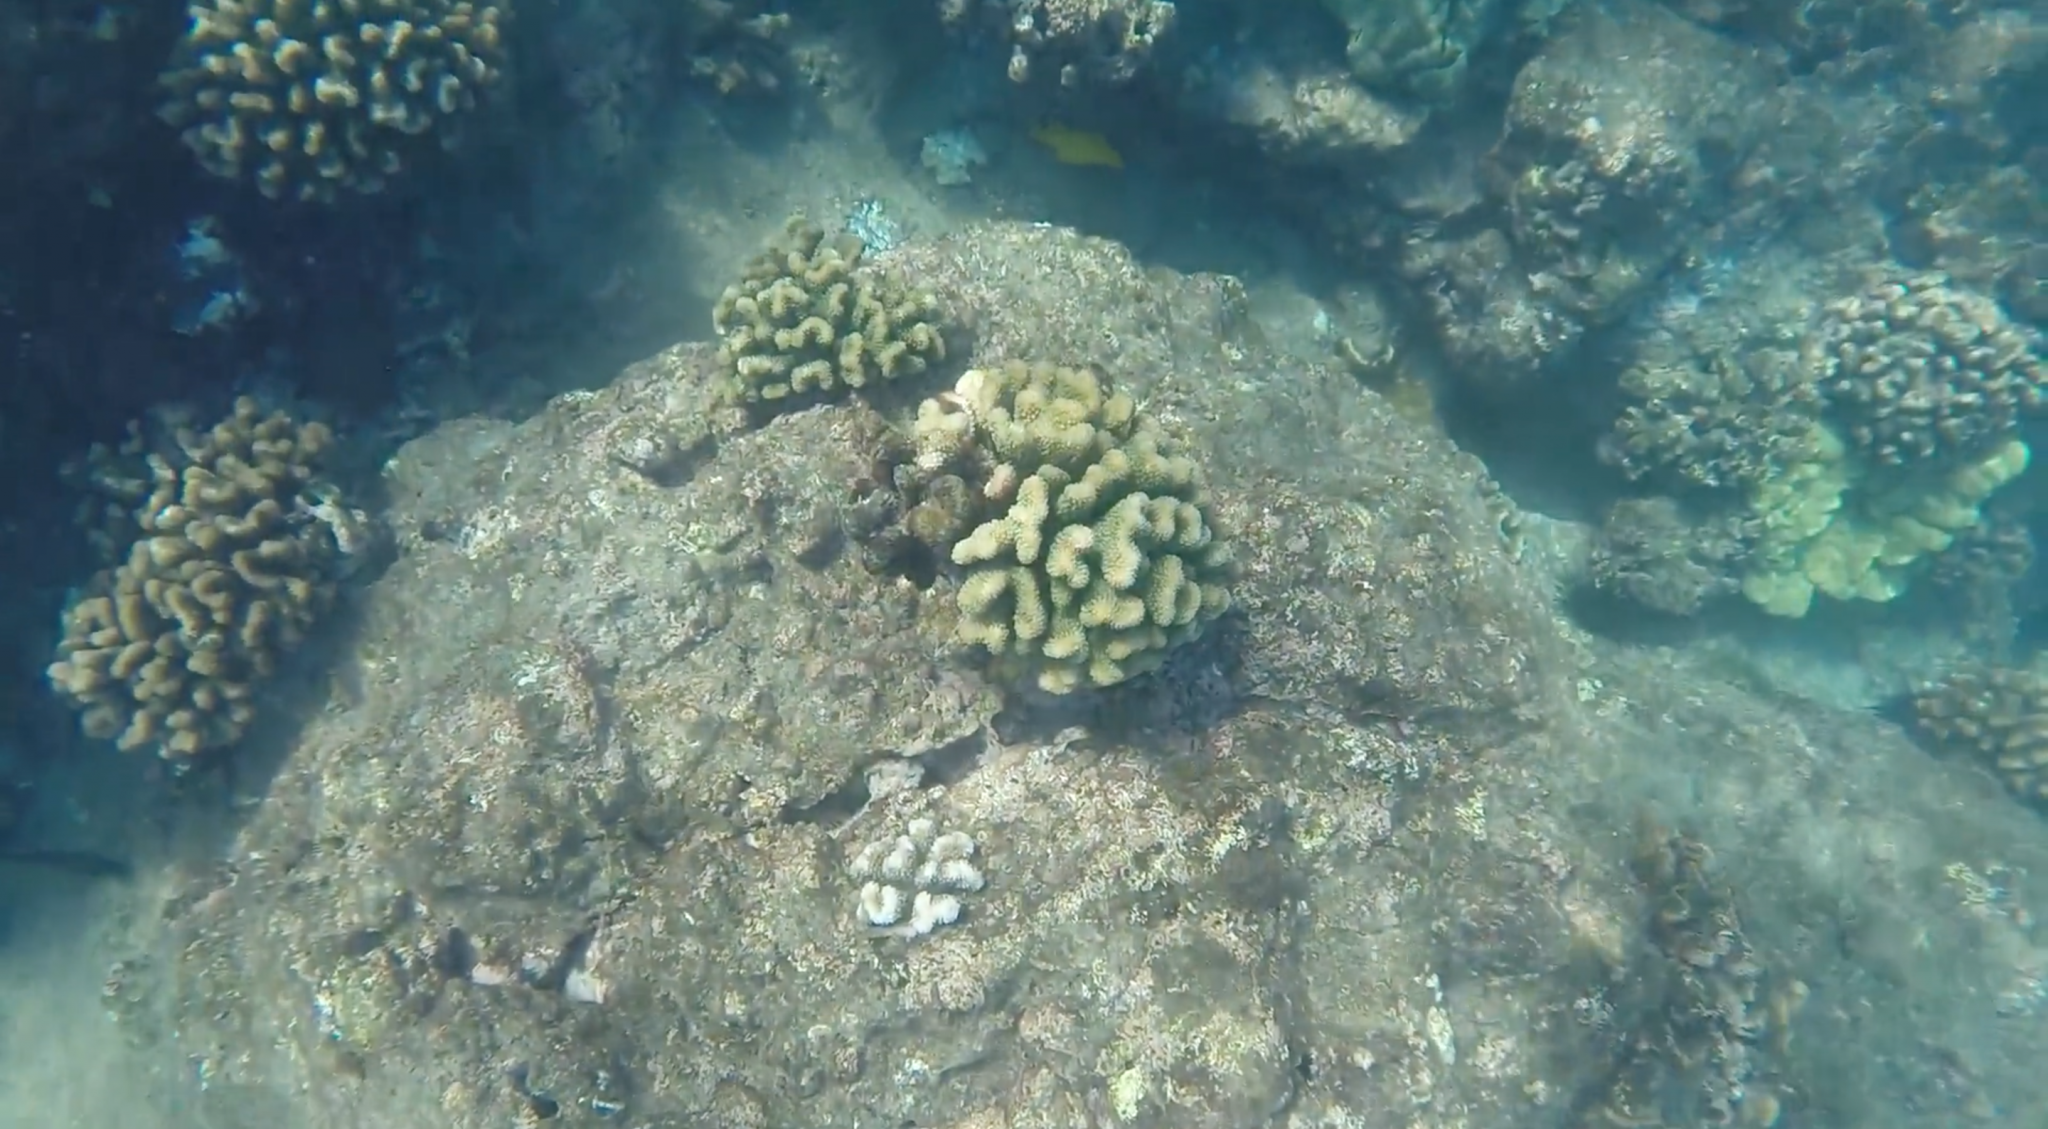 An image of coral